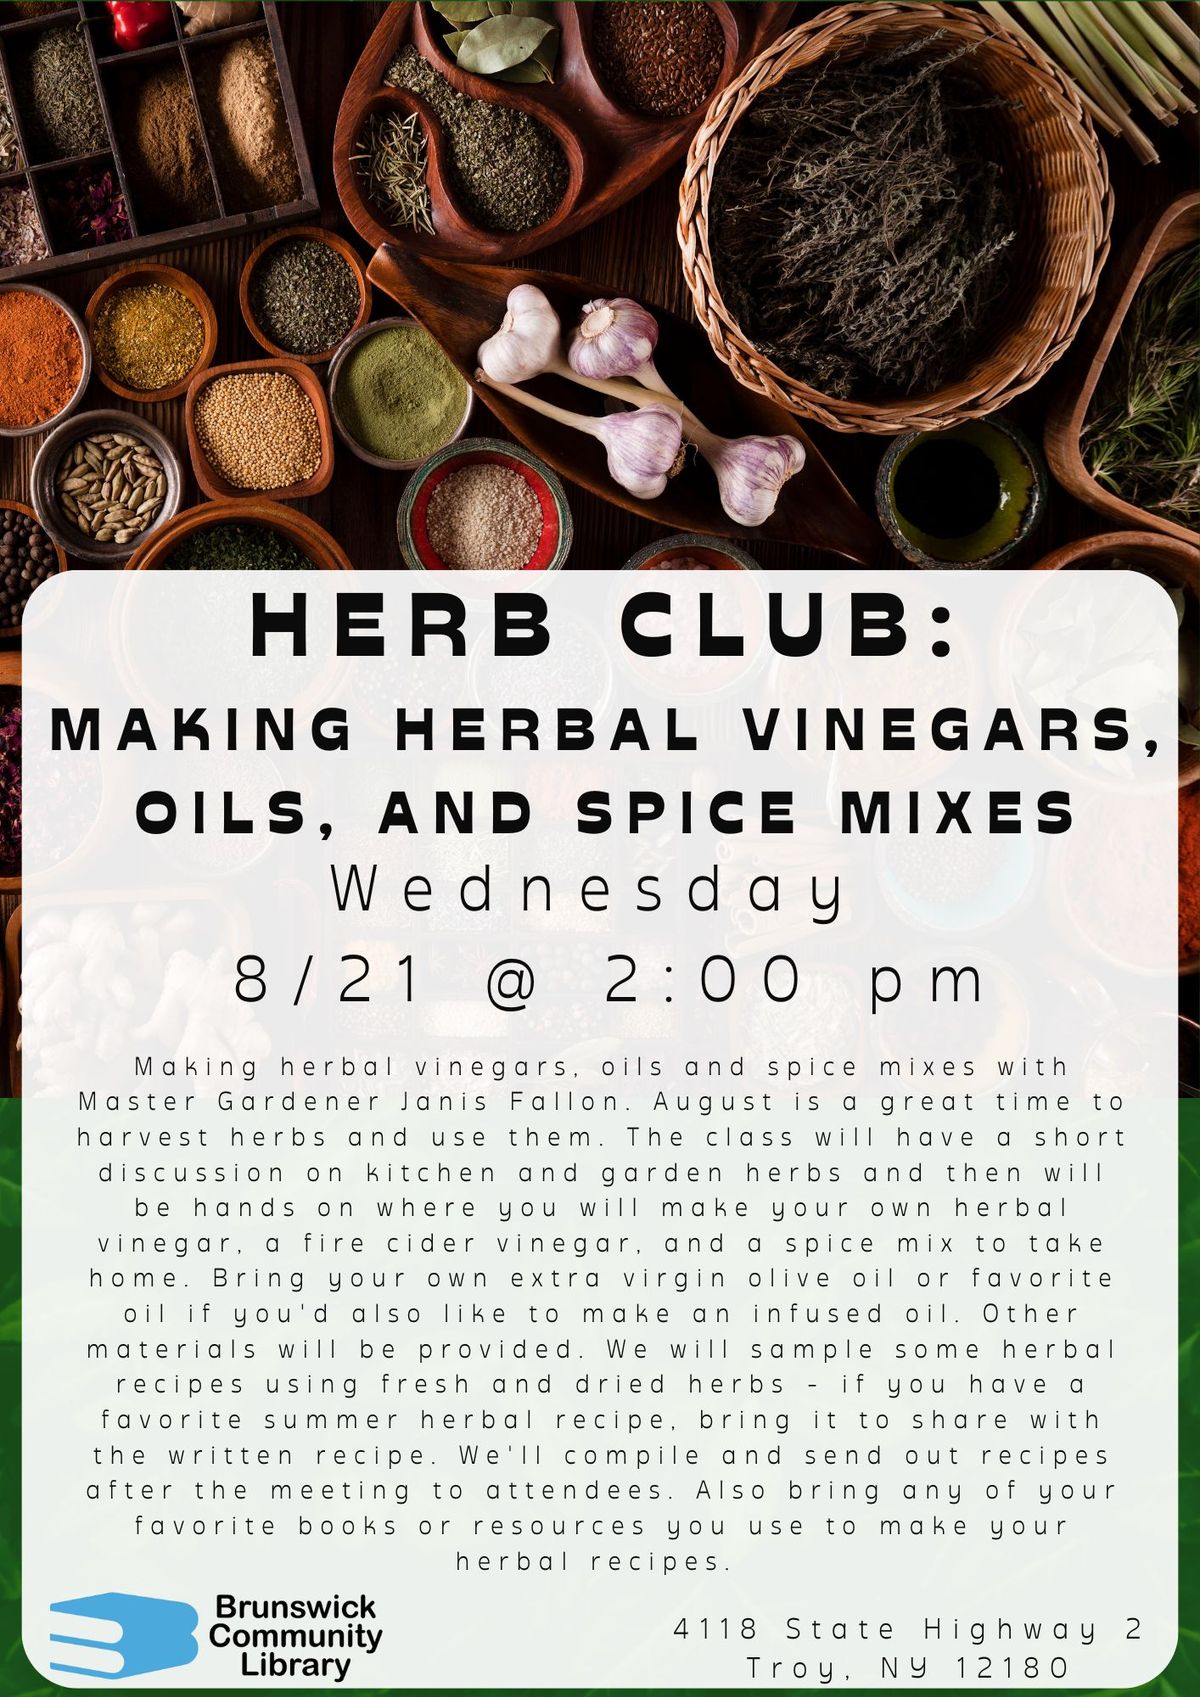 Herb Club: Making Herbal Vinegars, Oils, and Spice Mixes